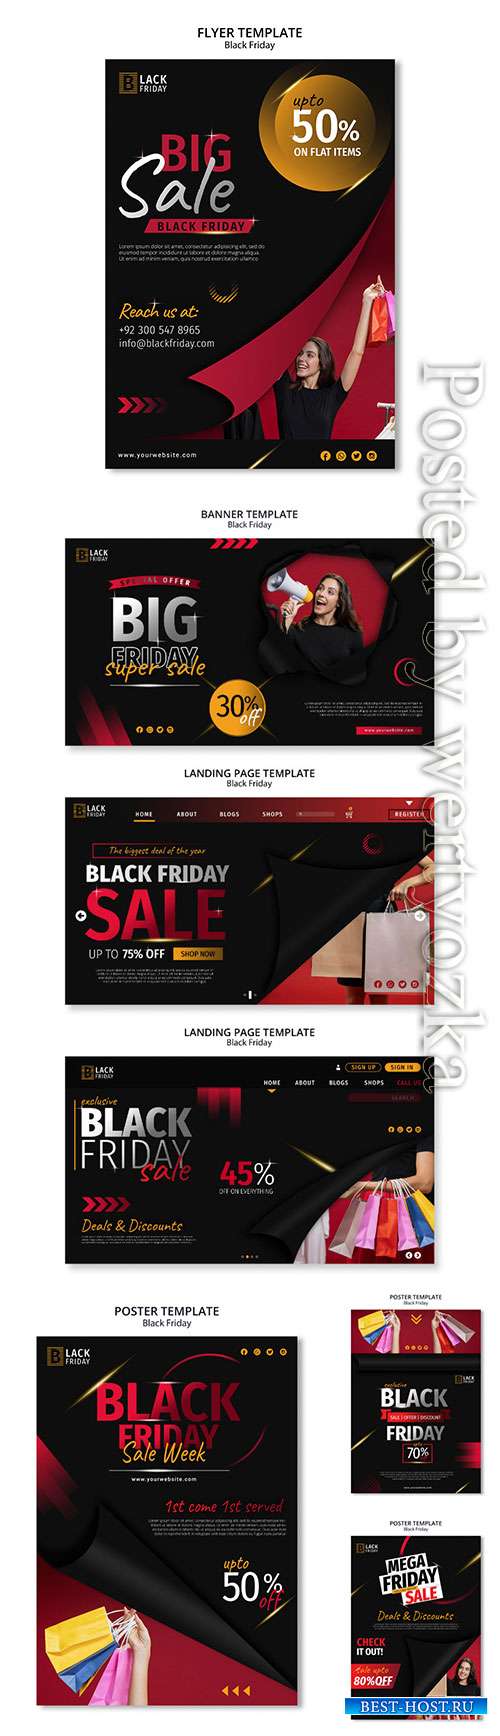 Black friday concept landing page template